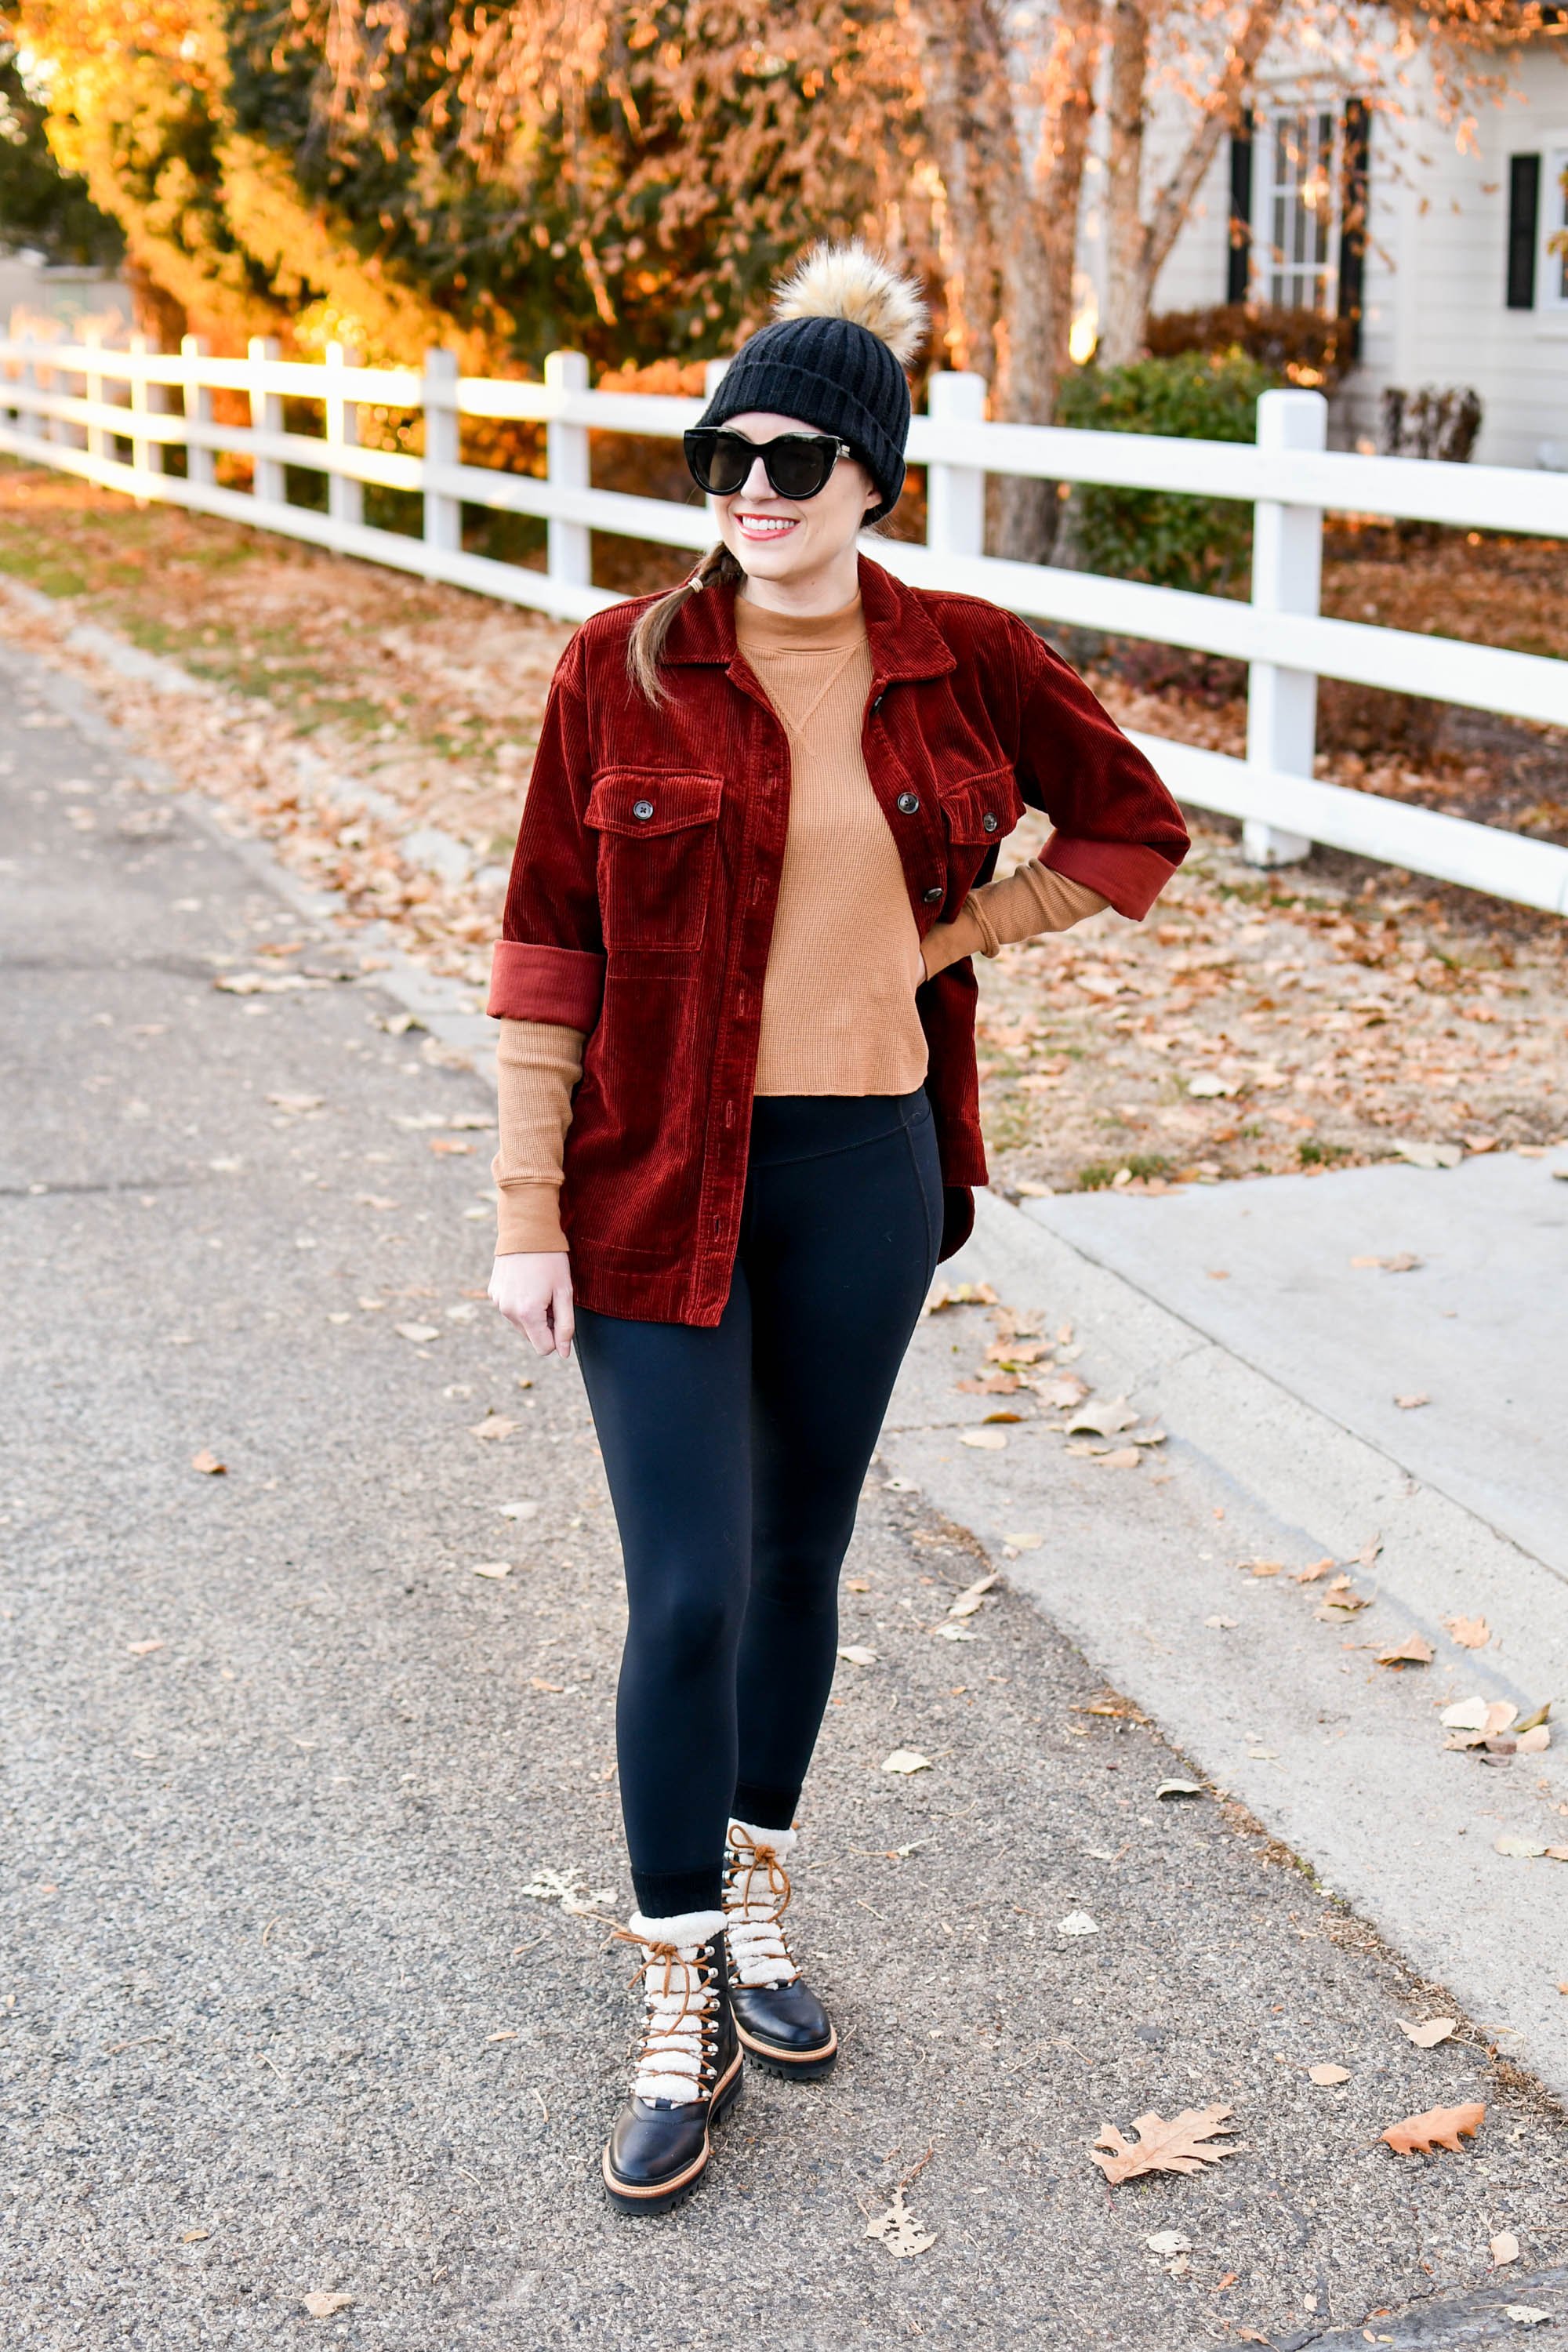 Red Corduroy Pants Outfits For Women (6 ideas & outfits)